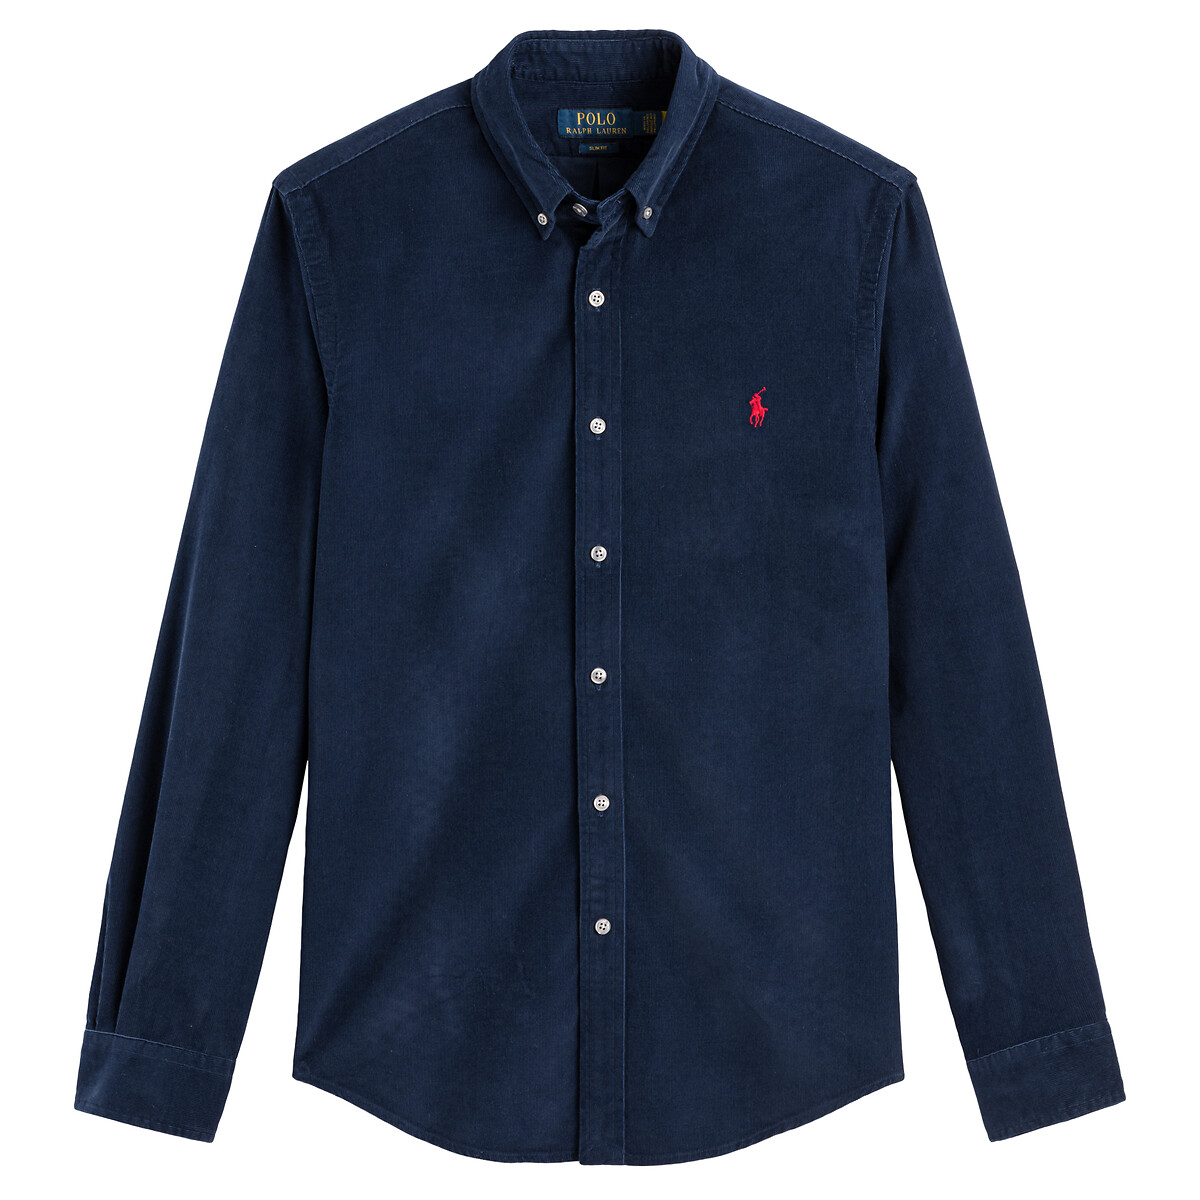 Image of Cotton Corduroy Shirt in Slim Fit